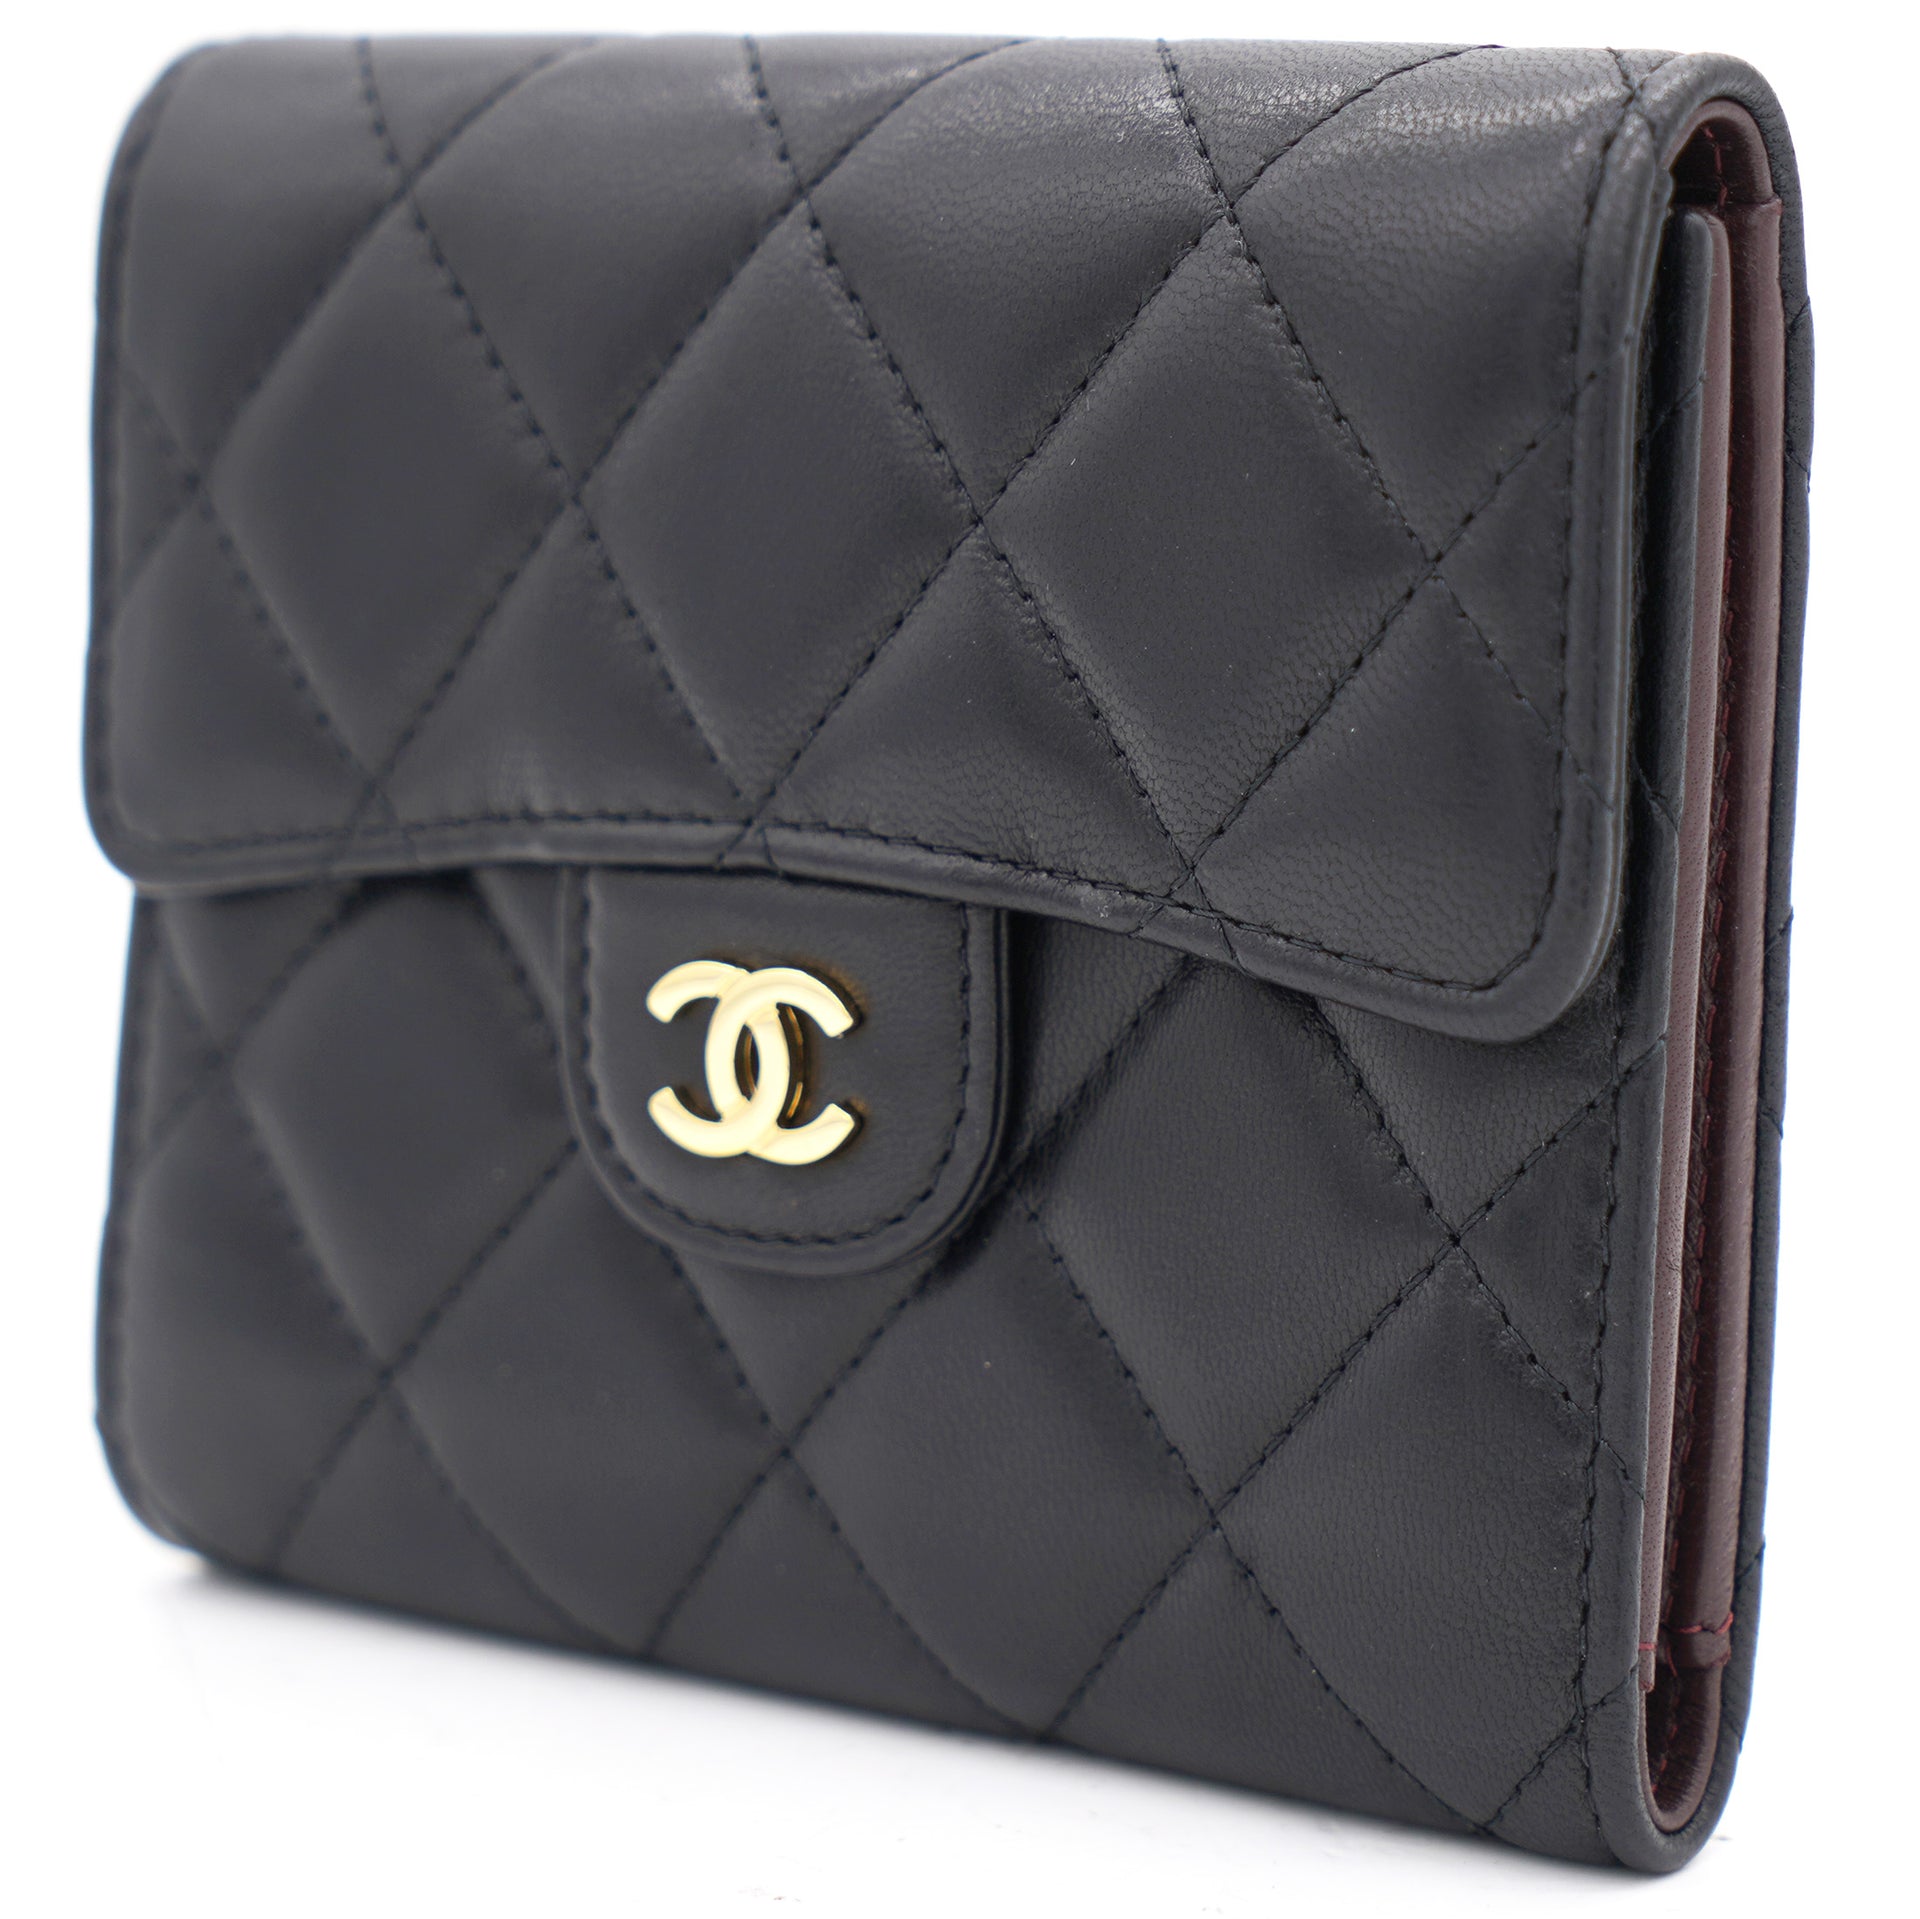 chanel gold wallet